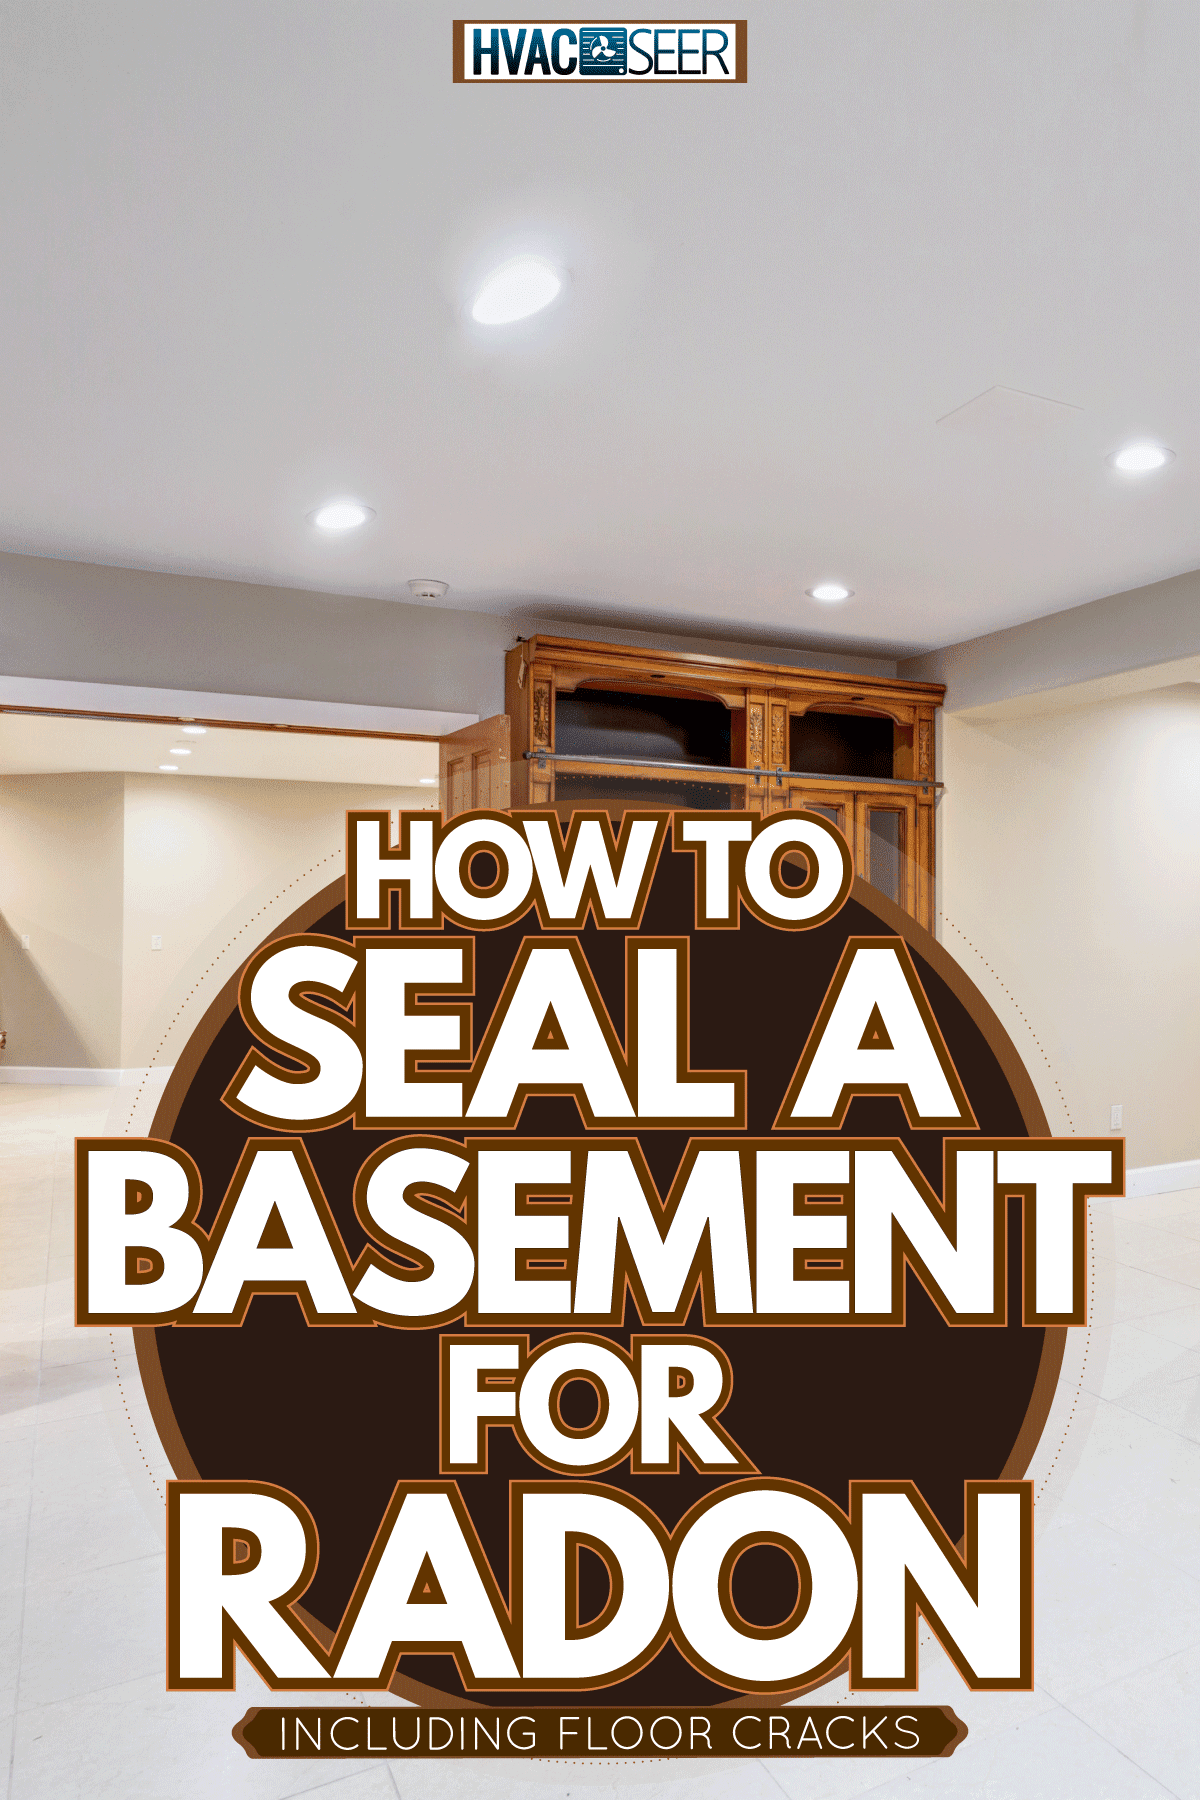 Classic rustic inspired basement with white flooring, wooden cabinets and white tile flooring, How To Seal A Basement For Radon [Inc. Floor Cracks]